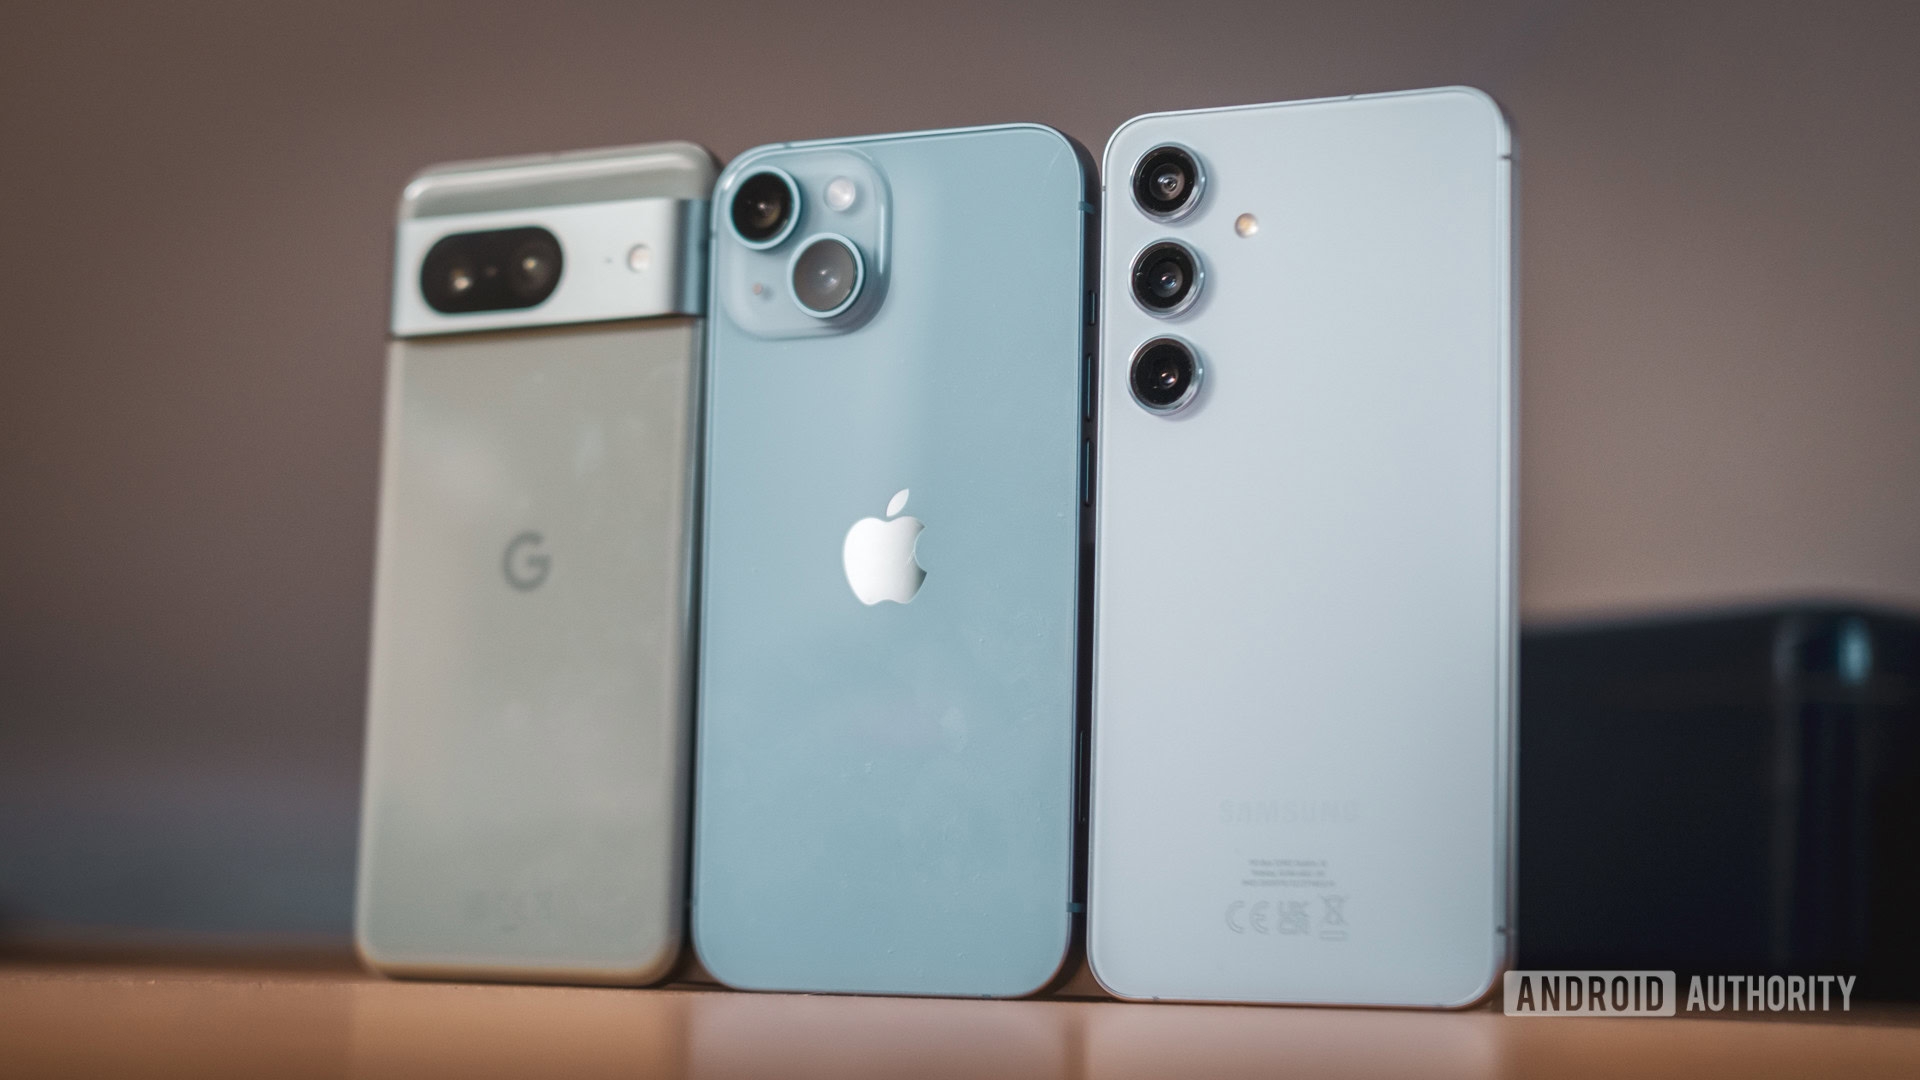 Apple finally confirms how long it will support iPhones, and it’s less than Samsung and Google